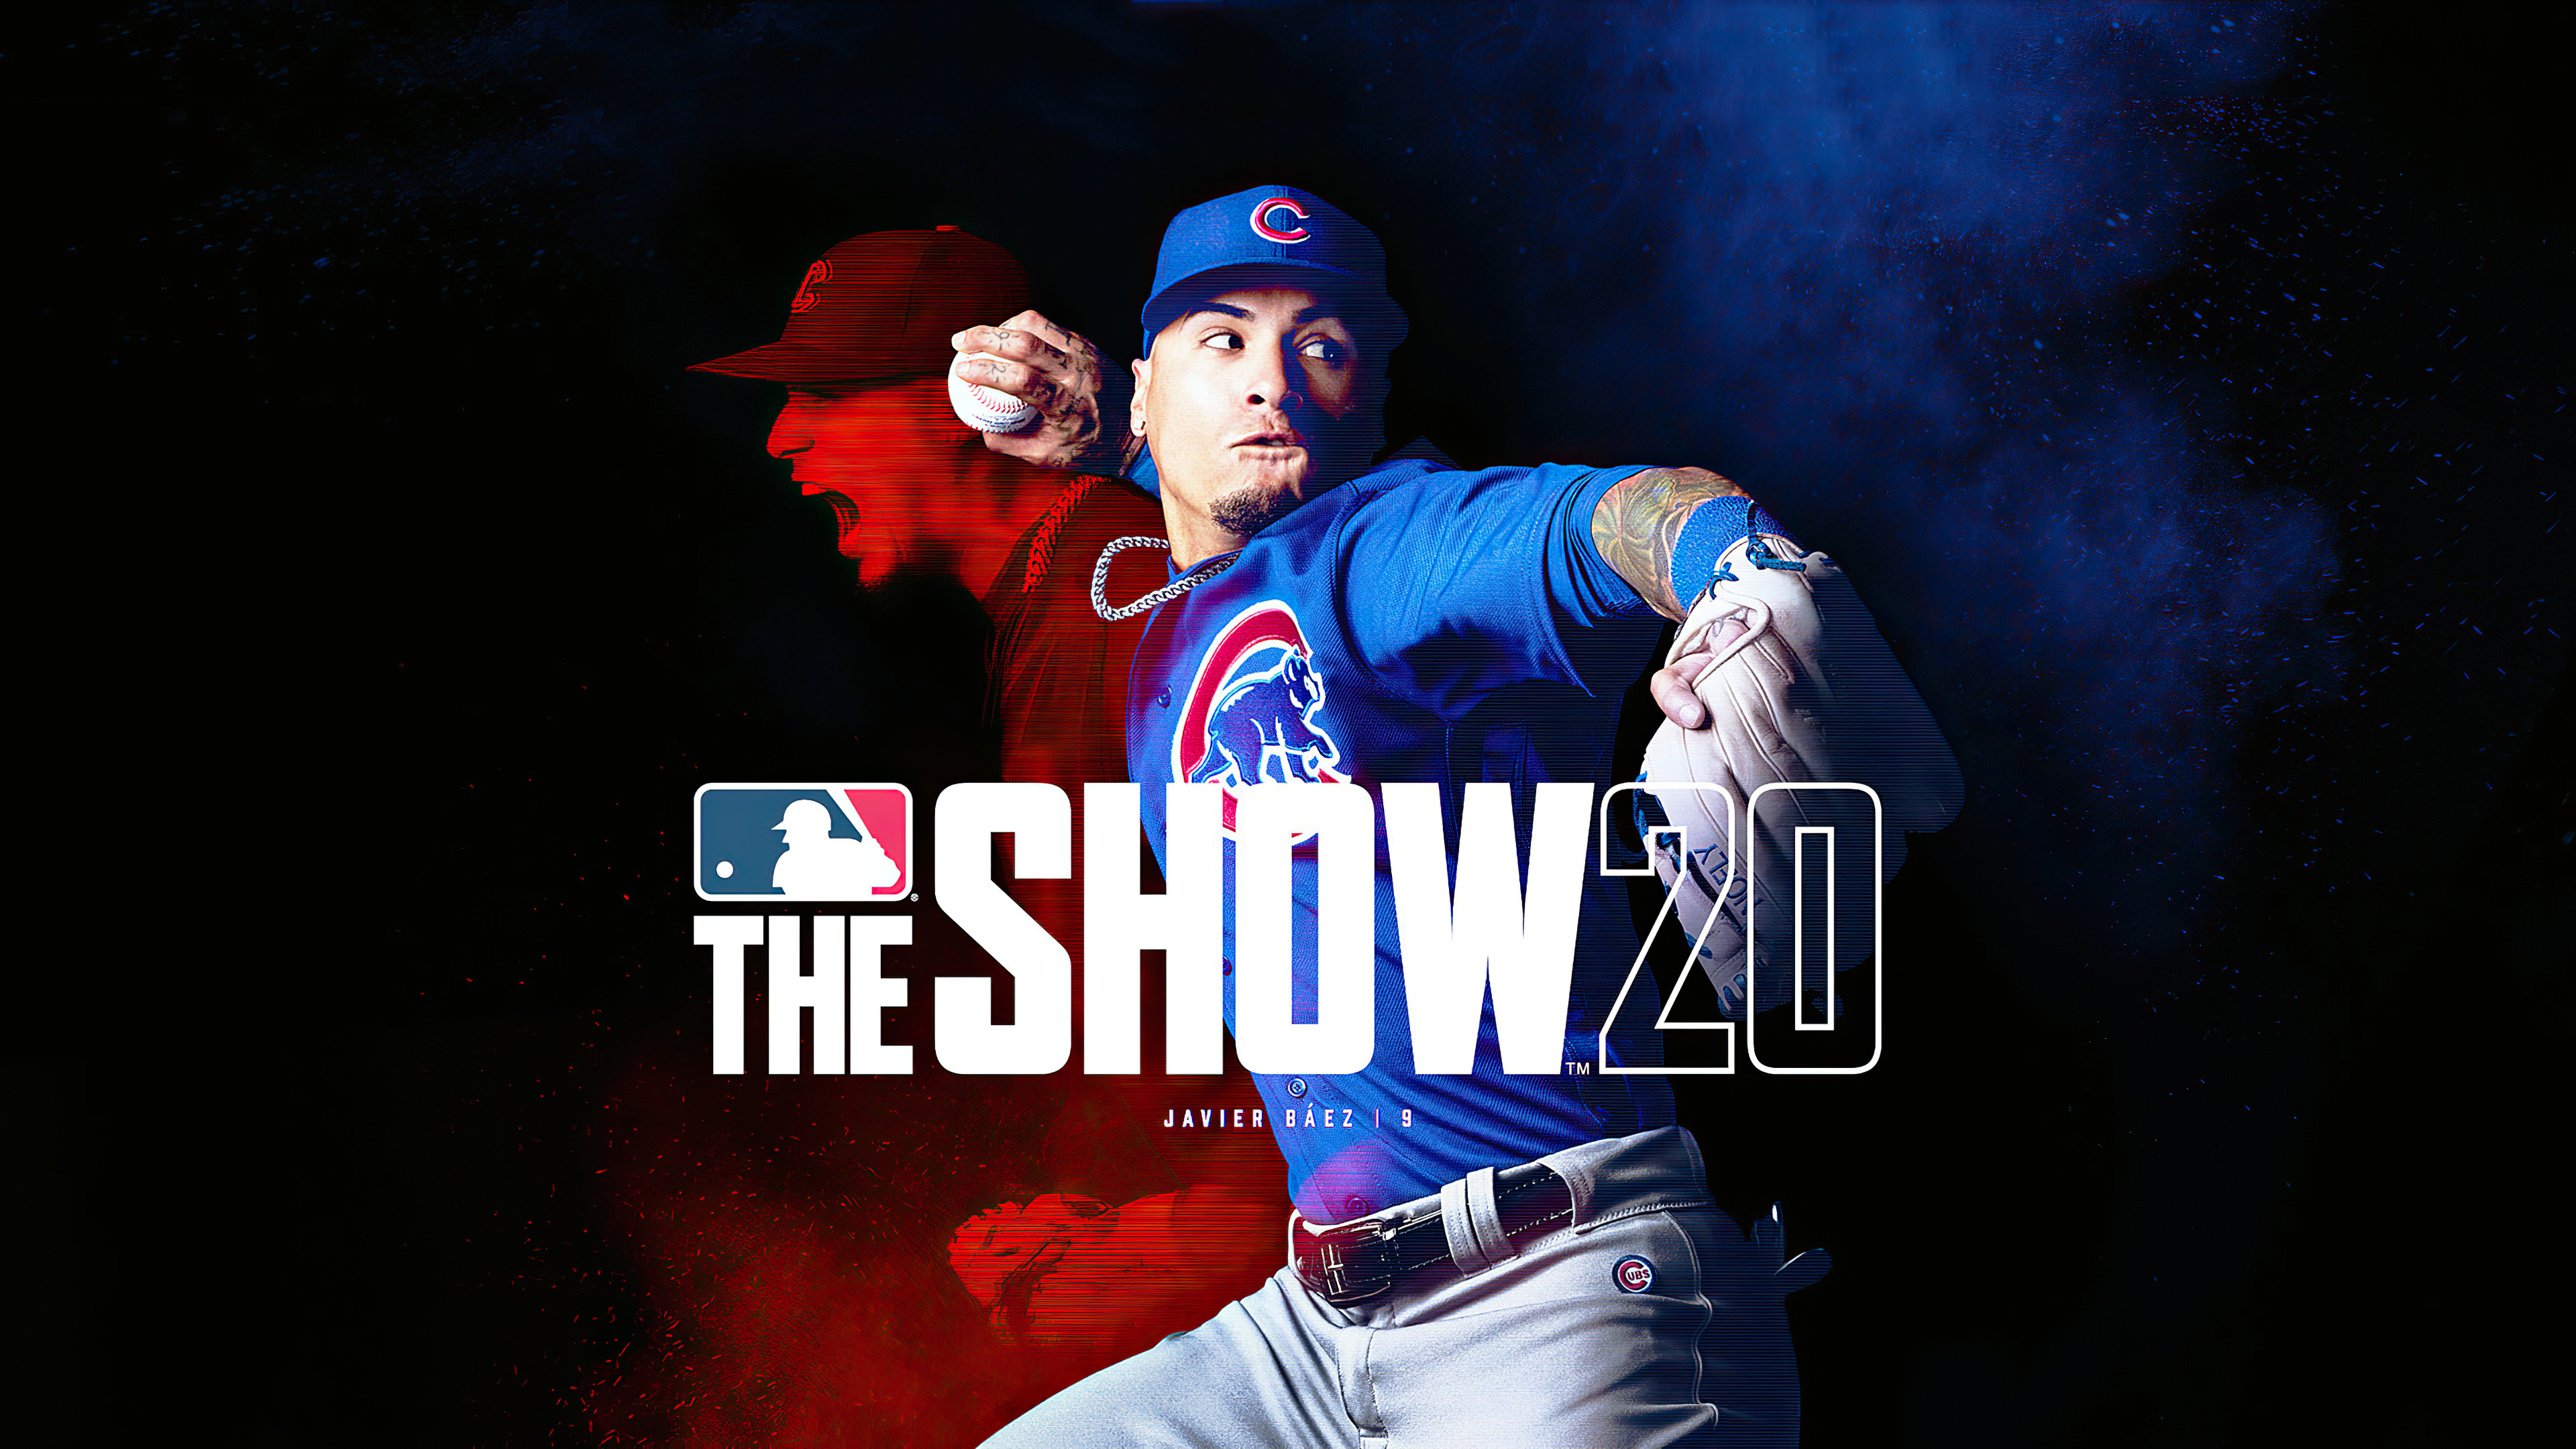 MLB The Show 20 Wallpaper,HD Games Wallpapers,4k Wallpapers,Images